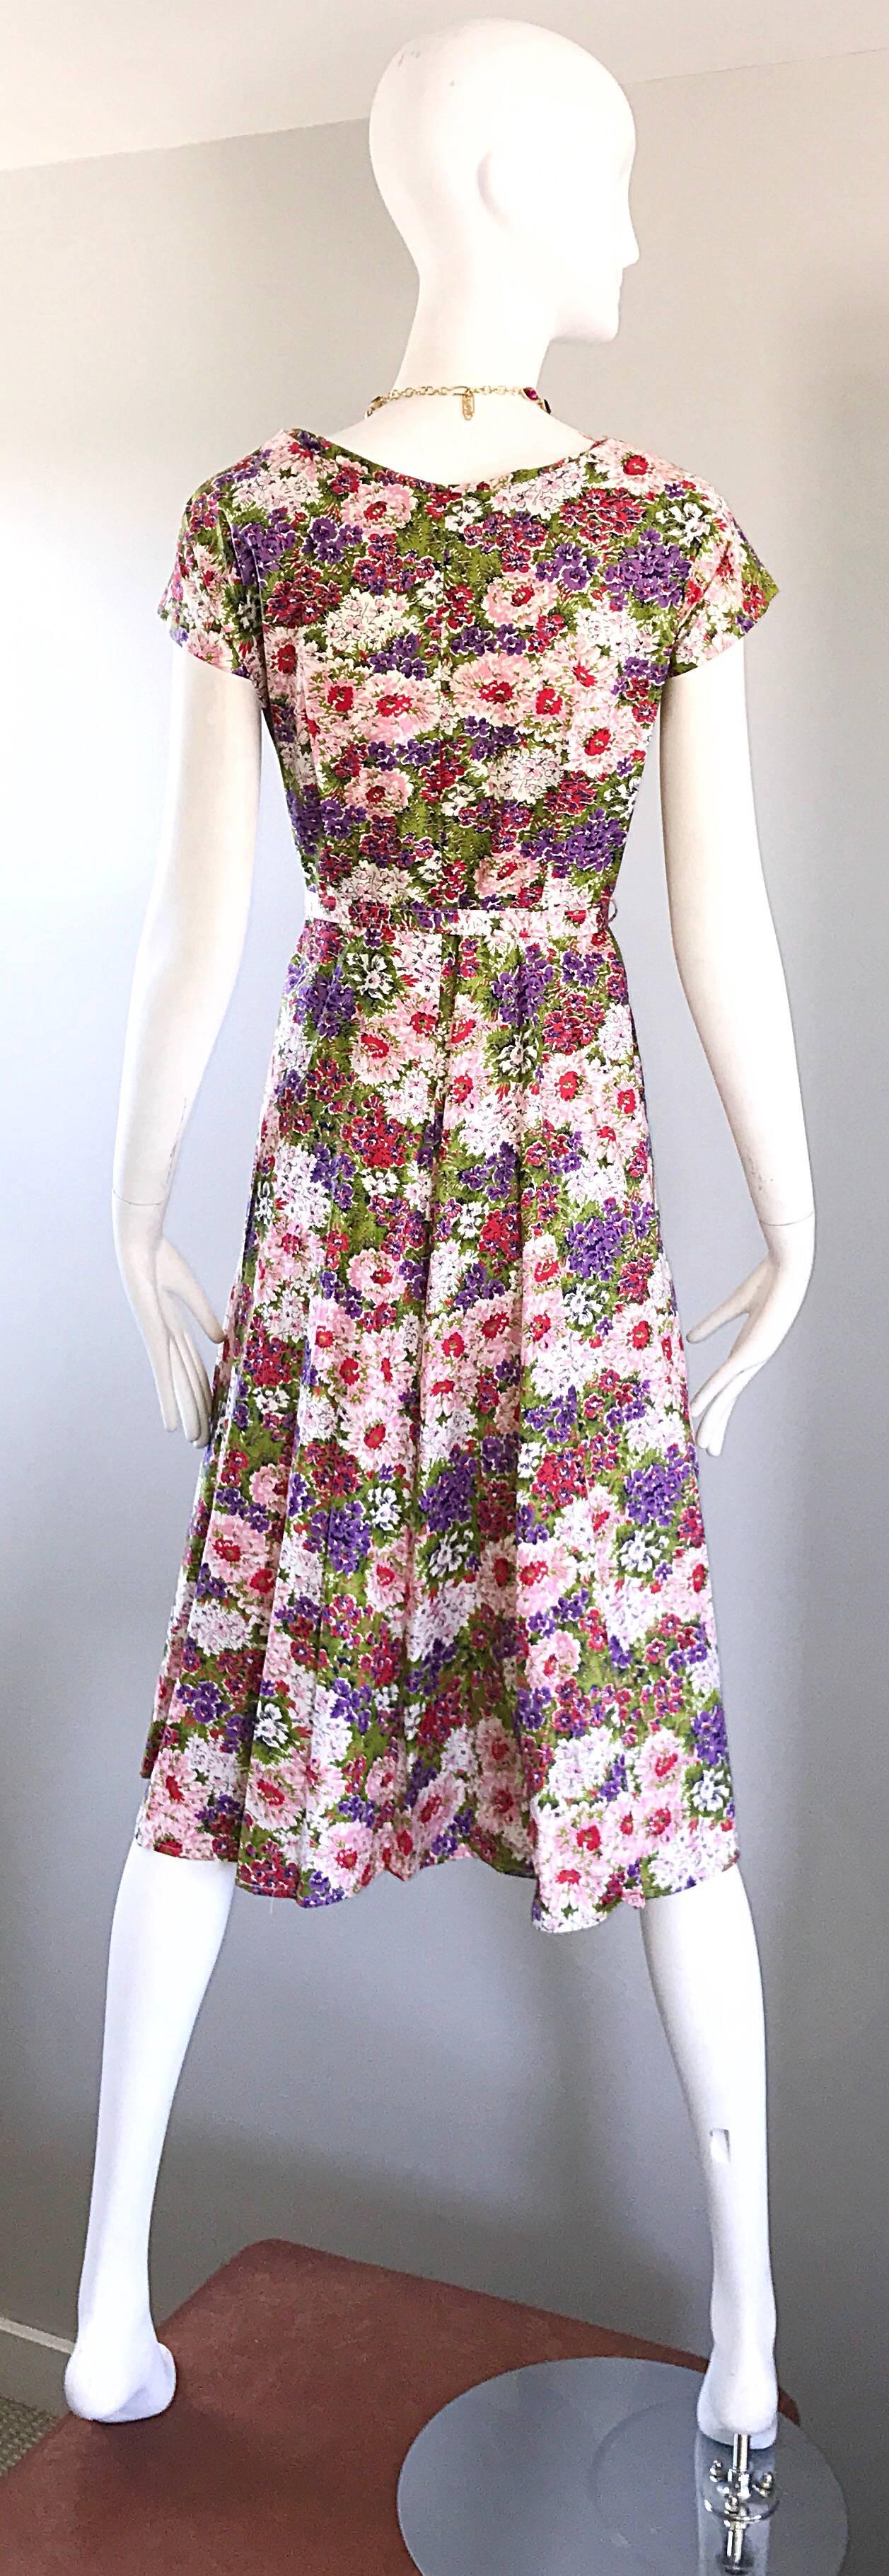 Women's Gorgeous 1950s Larger Size Rhinestone Encrusted Flower Belted Vintage 50s Dress